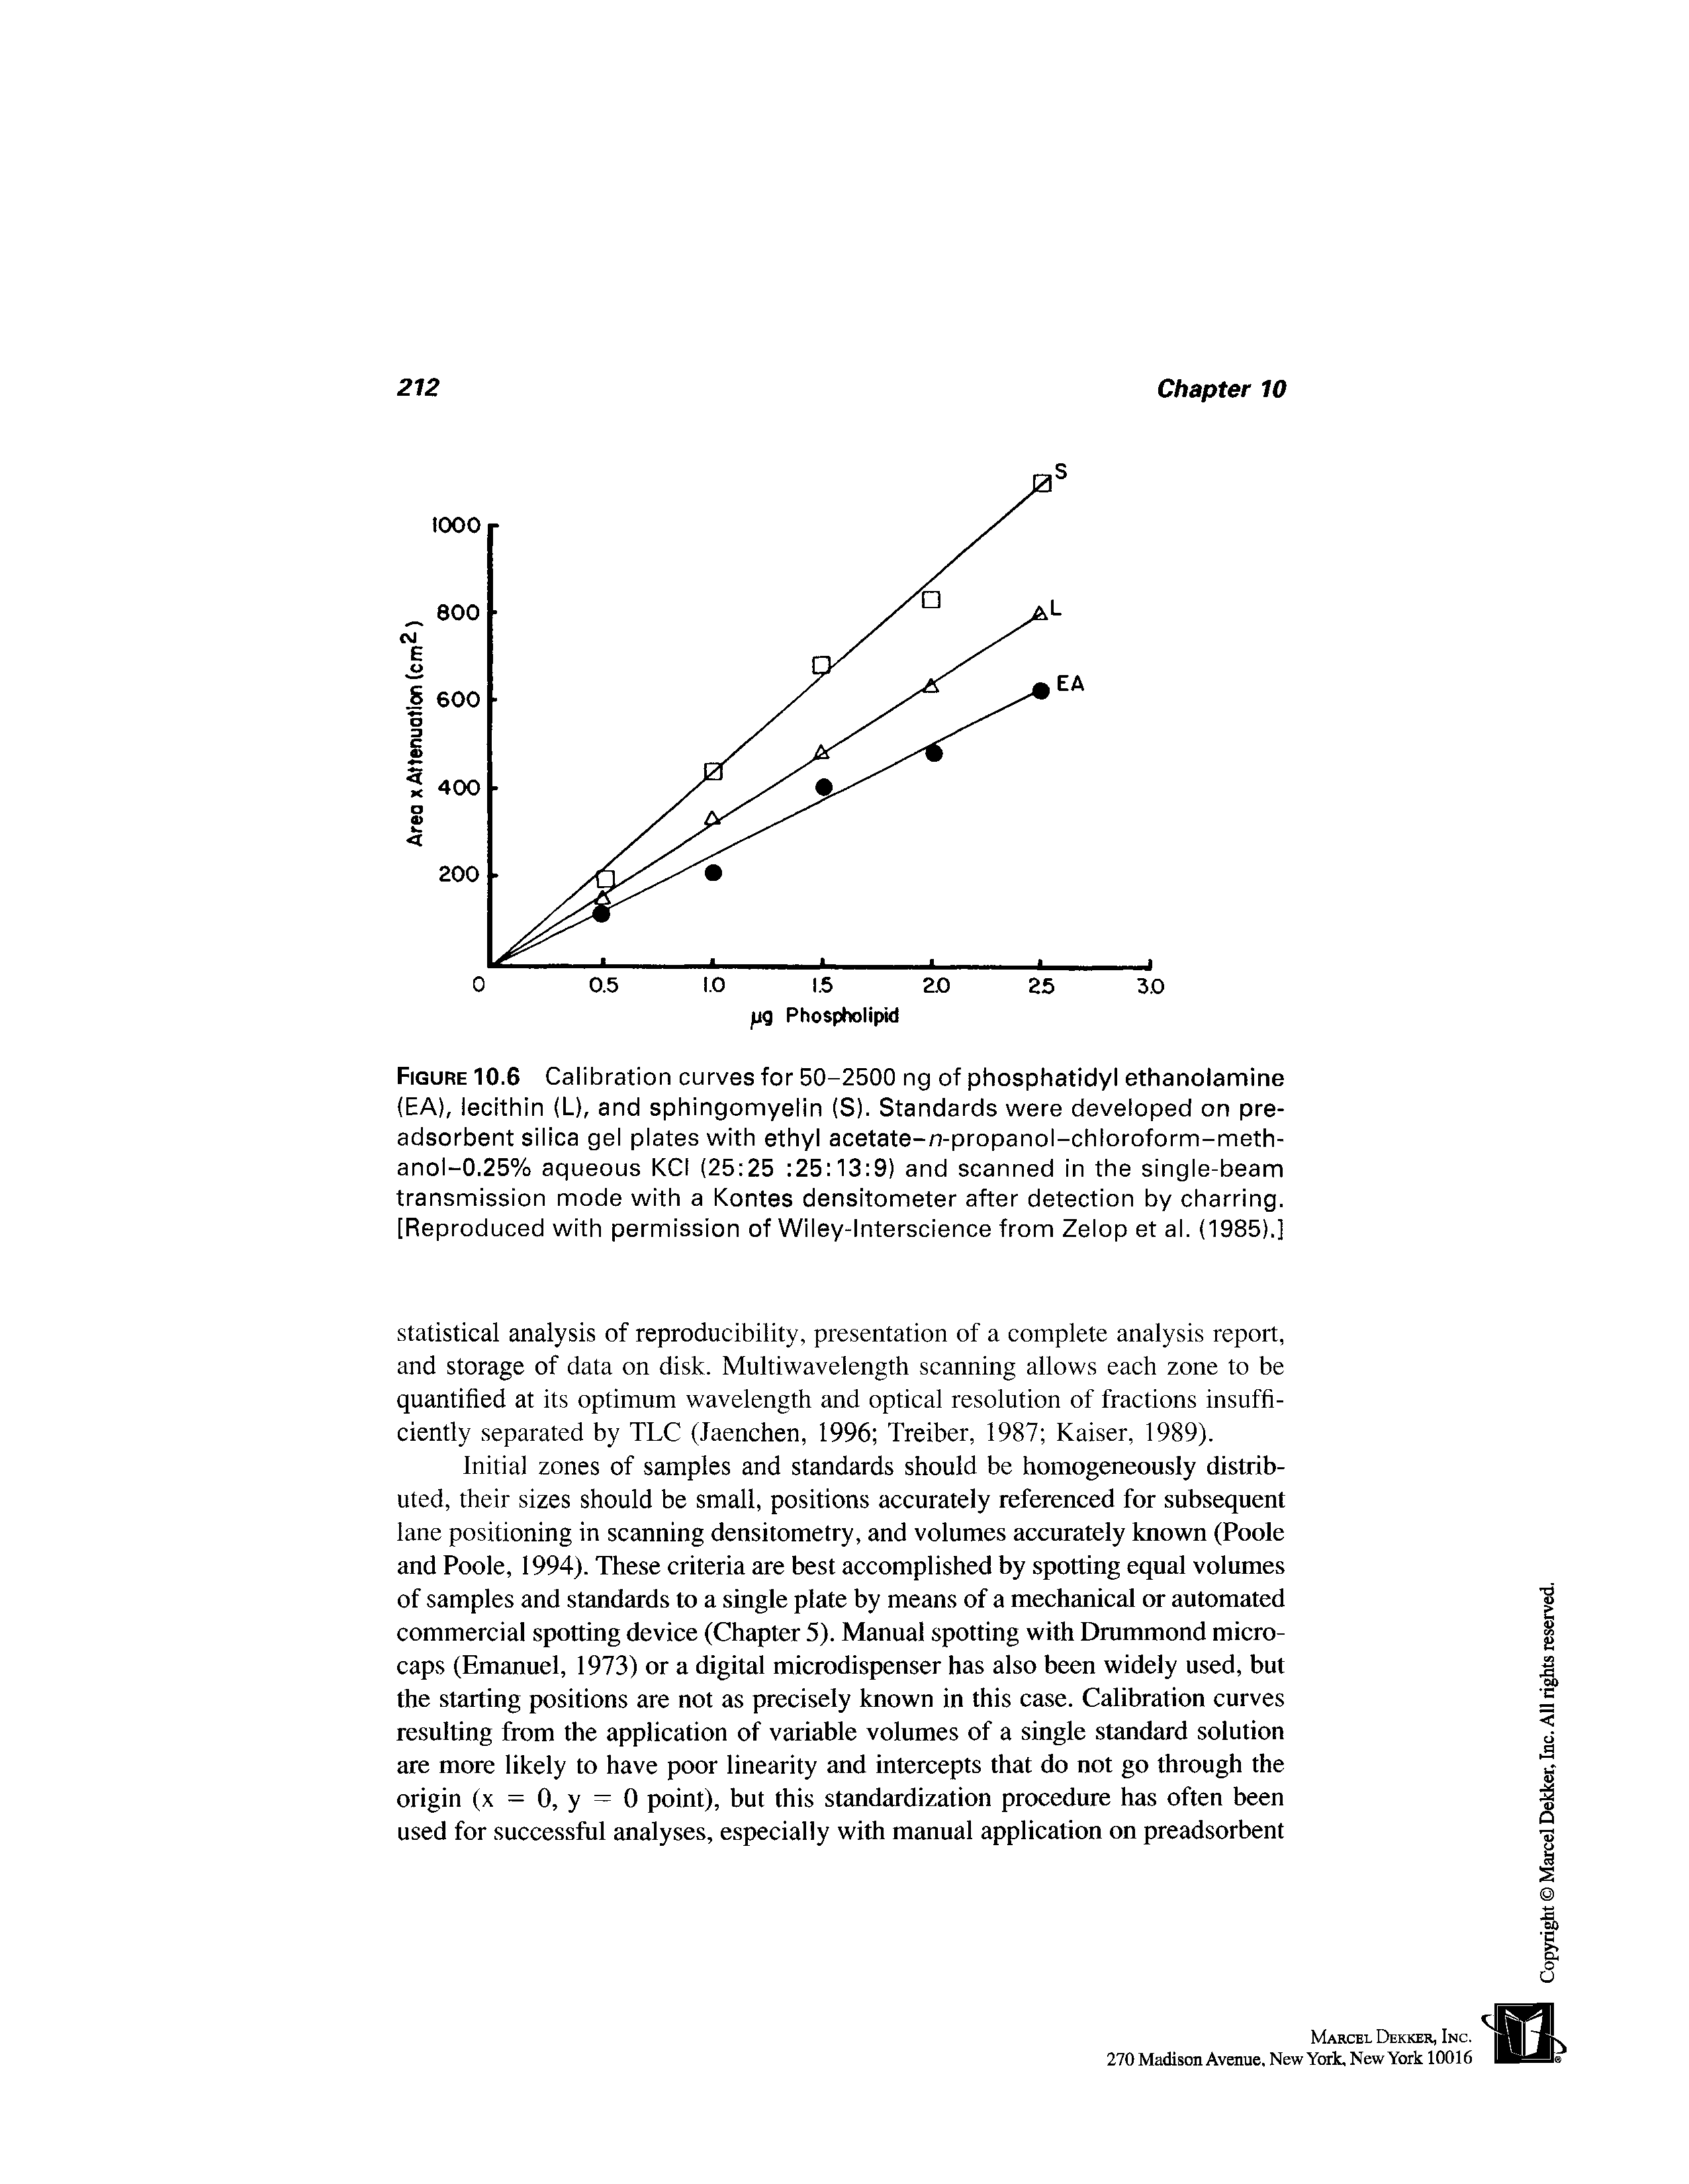 Figure 10.6 Calibration curves for 50-2500 ng of phosphatidyl ethanolamine (EA), lecithin (L), and sphingomyelin (S). Standards were developed on preadsorbent silica gel plates with ethyl acetate-n-propanol-chloroform-meth-anol-0.25% aqueous KCI (25 25 25 13 9) and scanned in the single-beam transmission mode with a Kontes densitometer after detection by charring. [Reproduced with permission of Wiley-Interscience from Zelop et al. (1985).]...